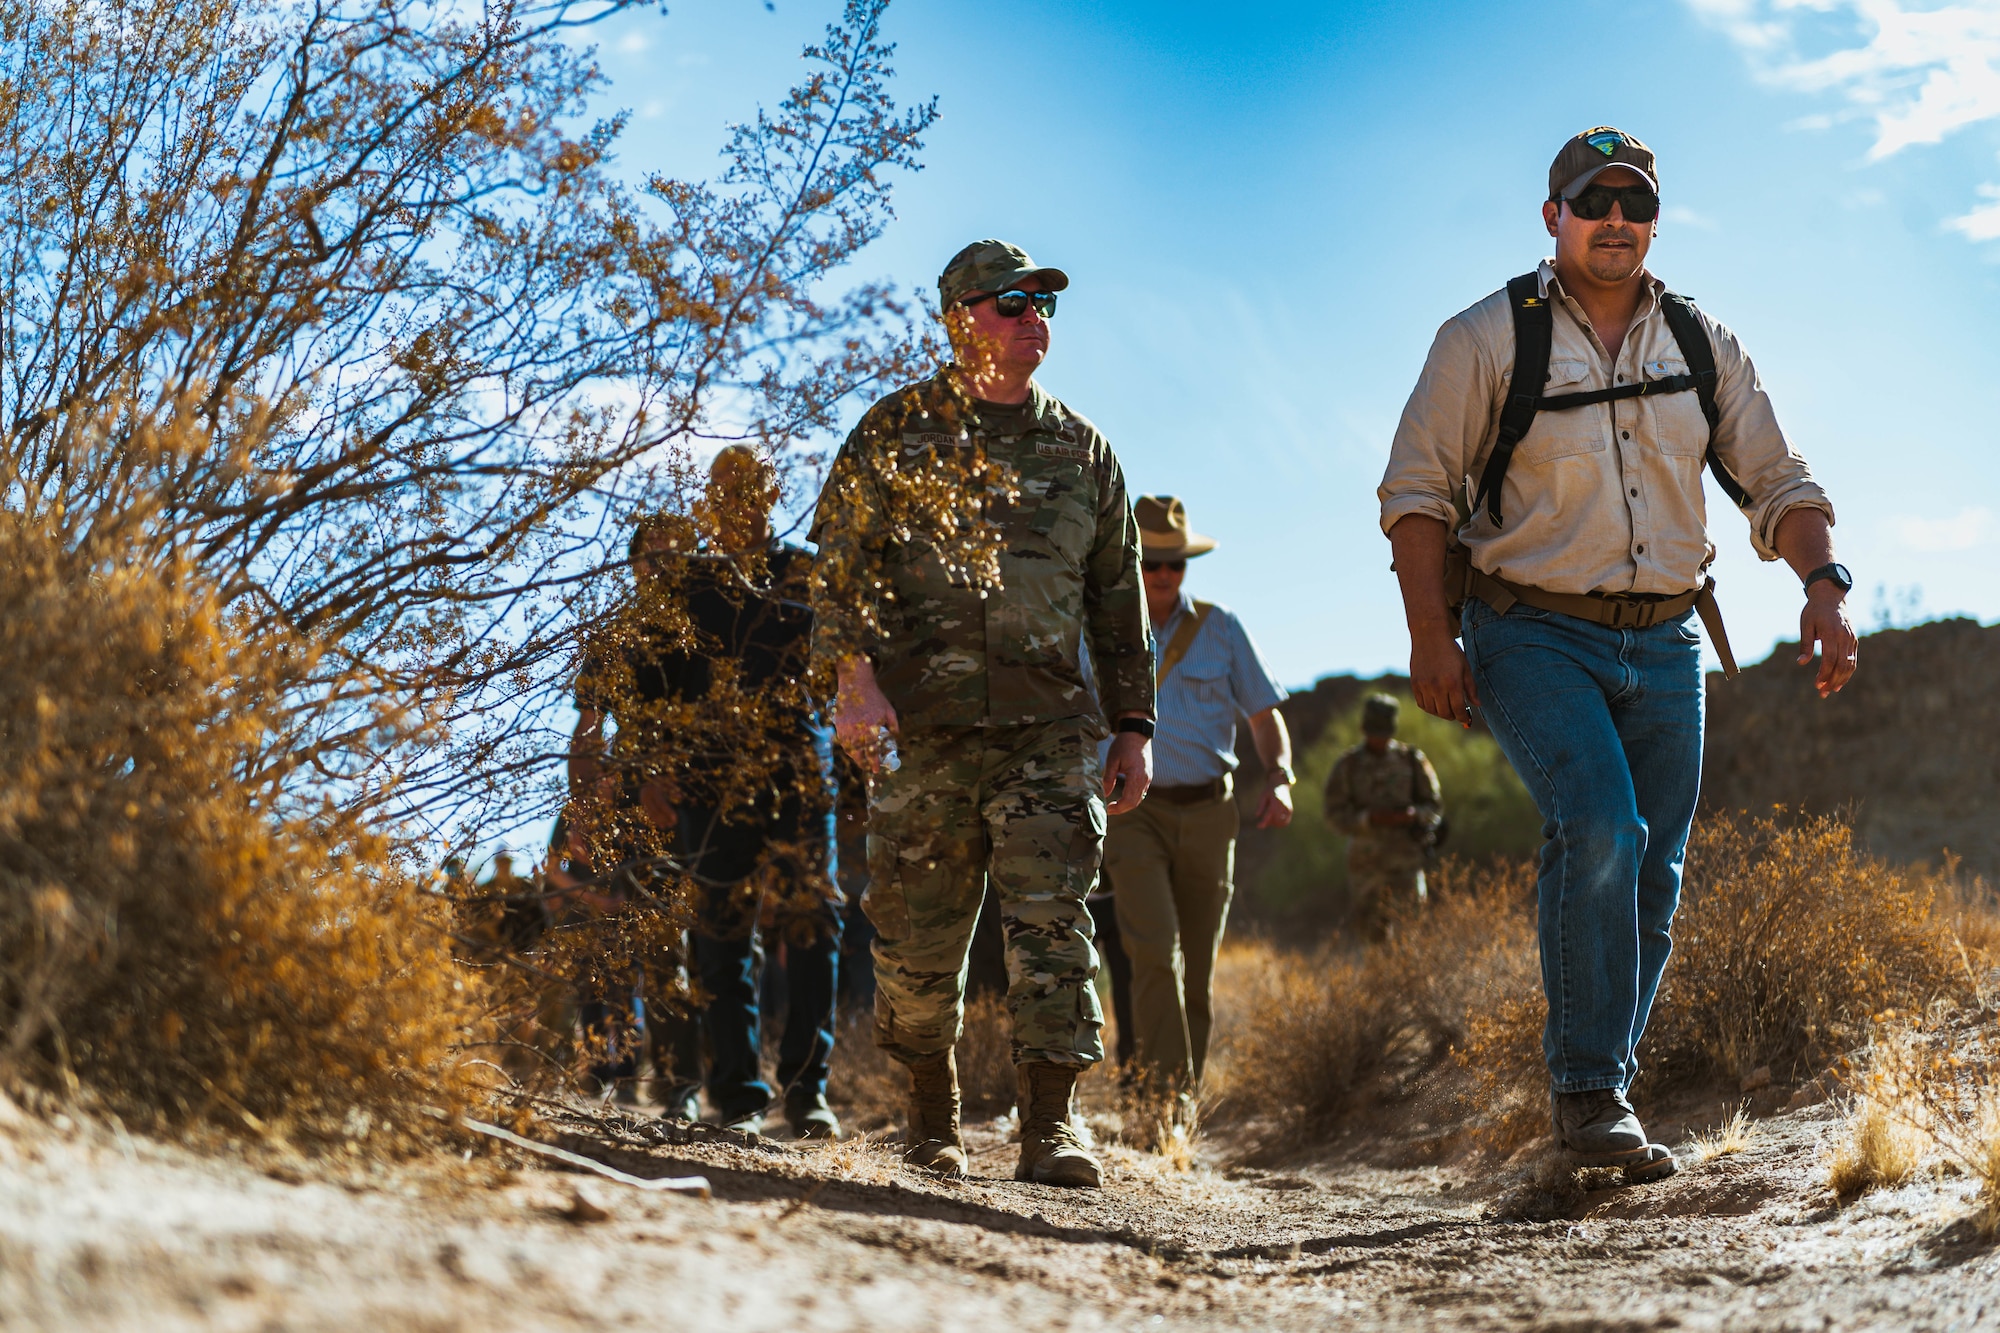 Luke Air Force Base Honorary Commanders hike at Chris Glyphs archaeological site